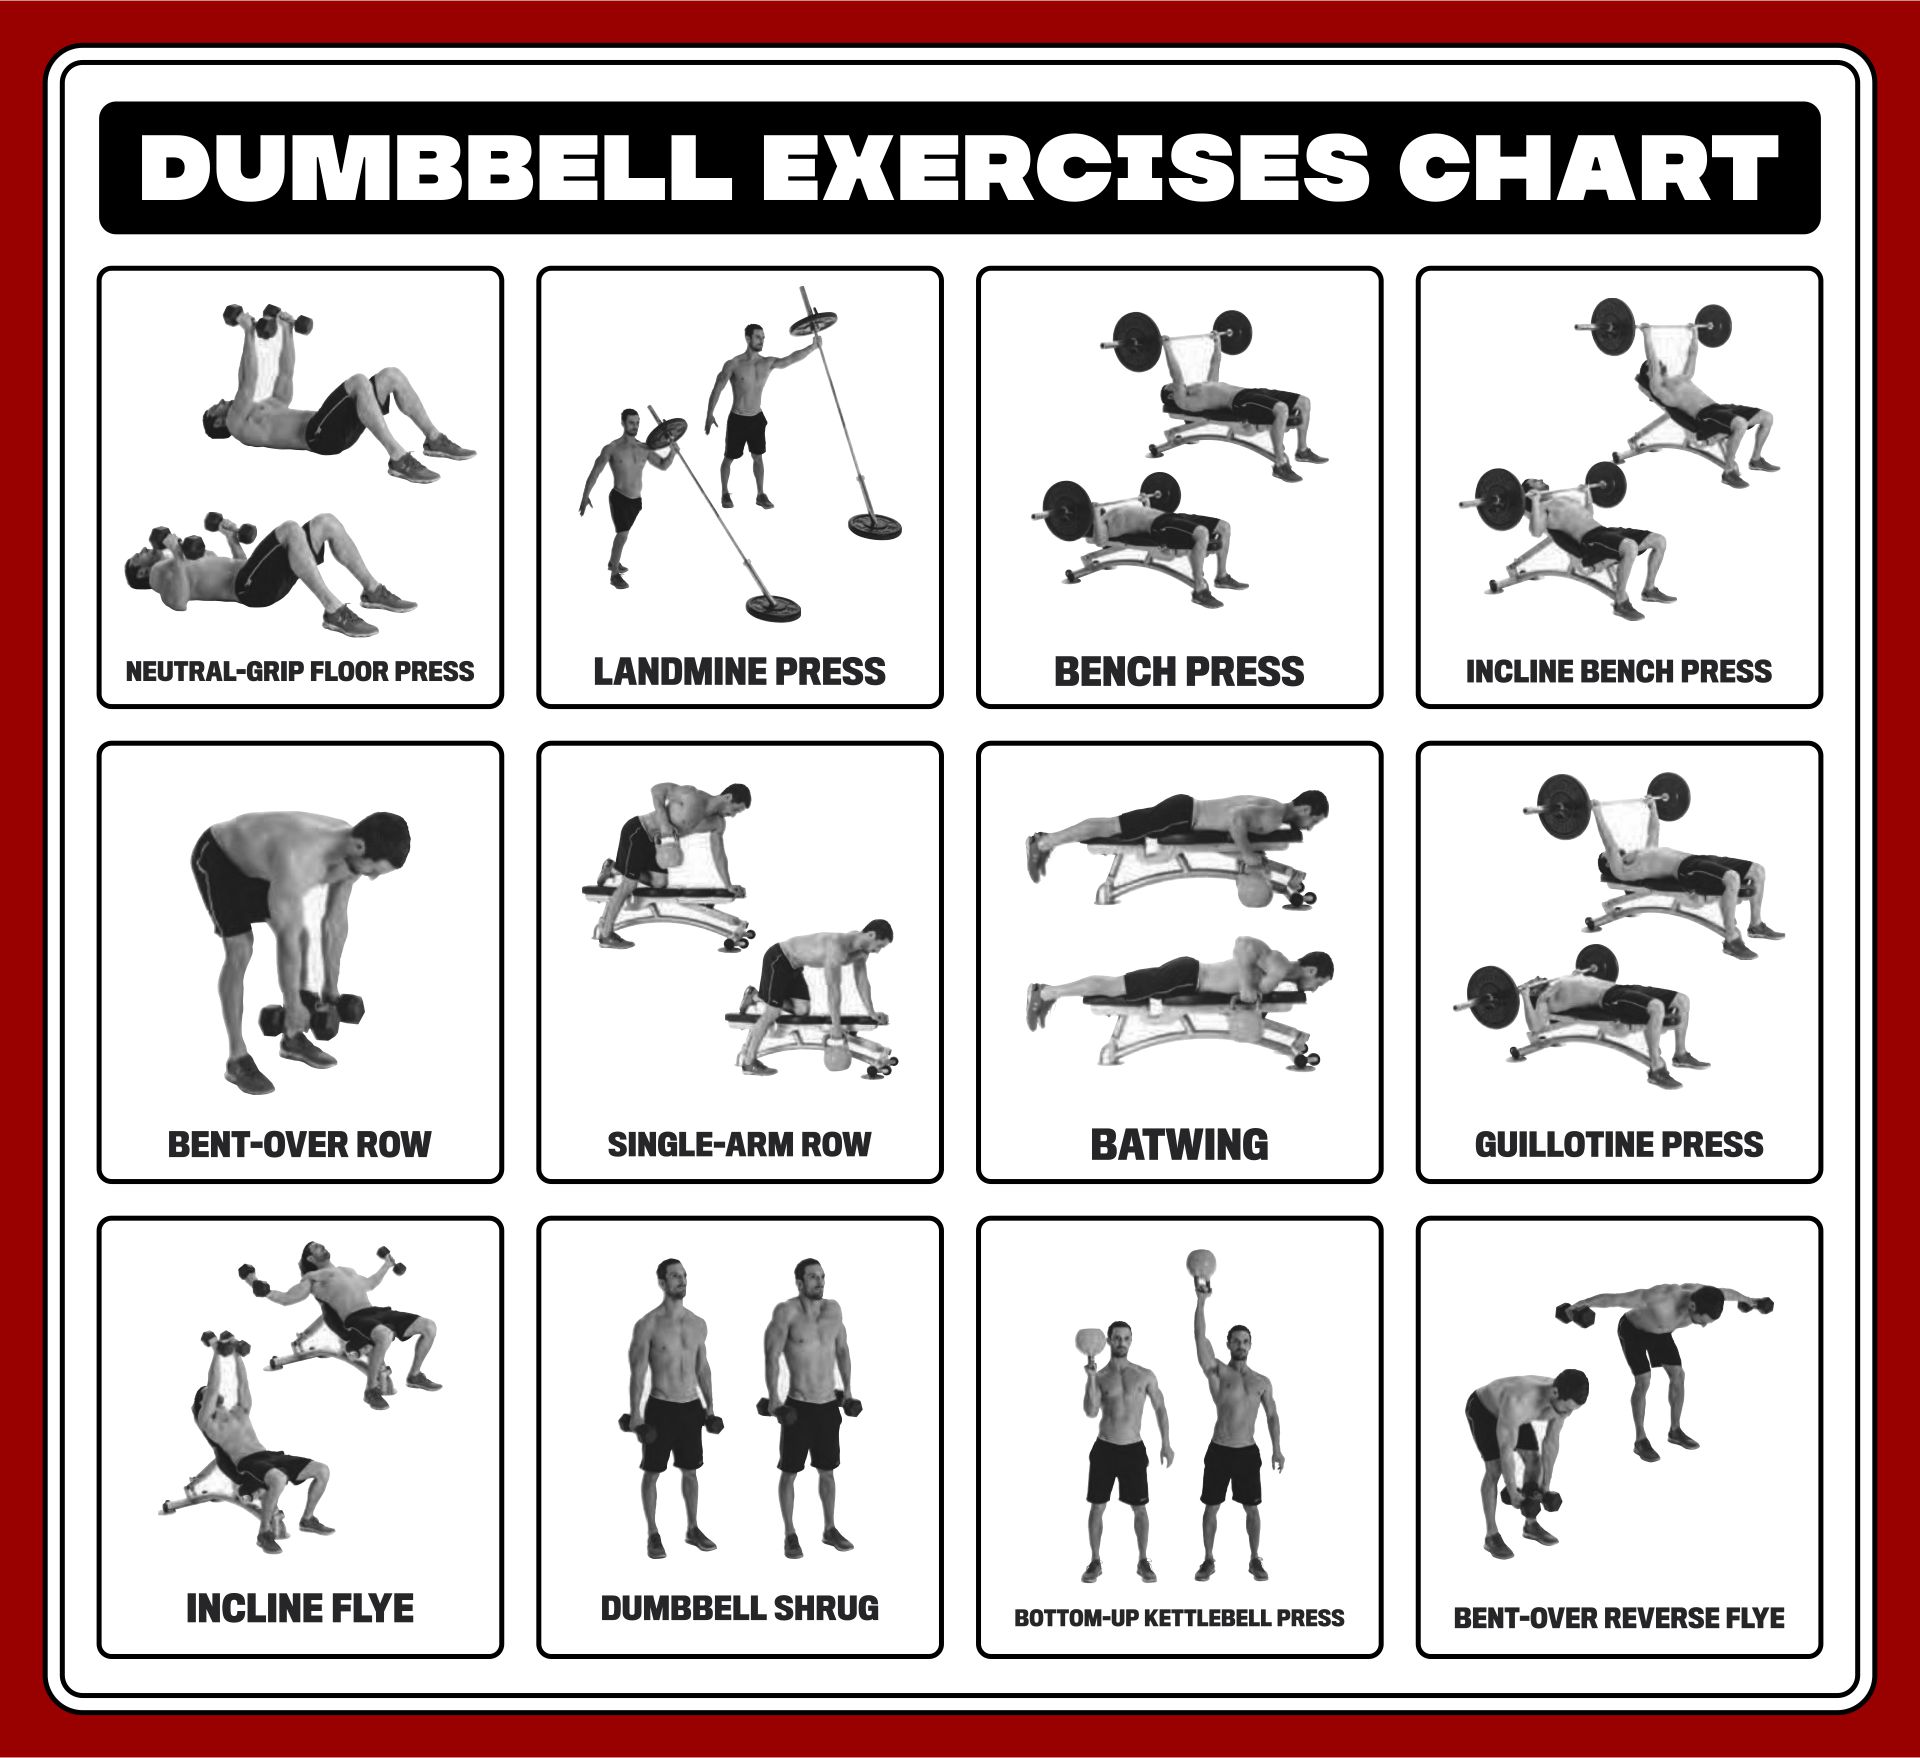 Dumbbell Workout Plan At Home Pdf | sport1stfuture.org